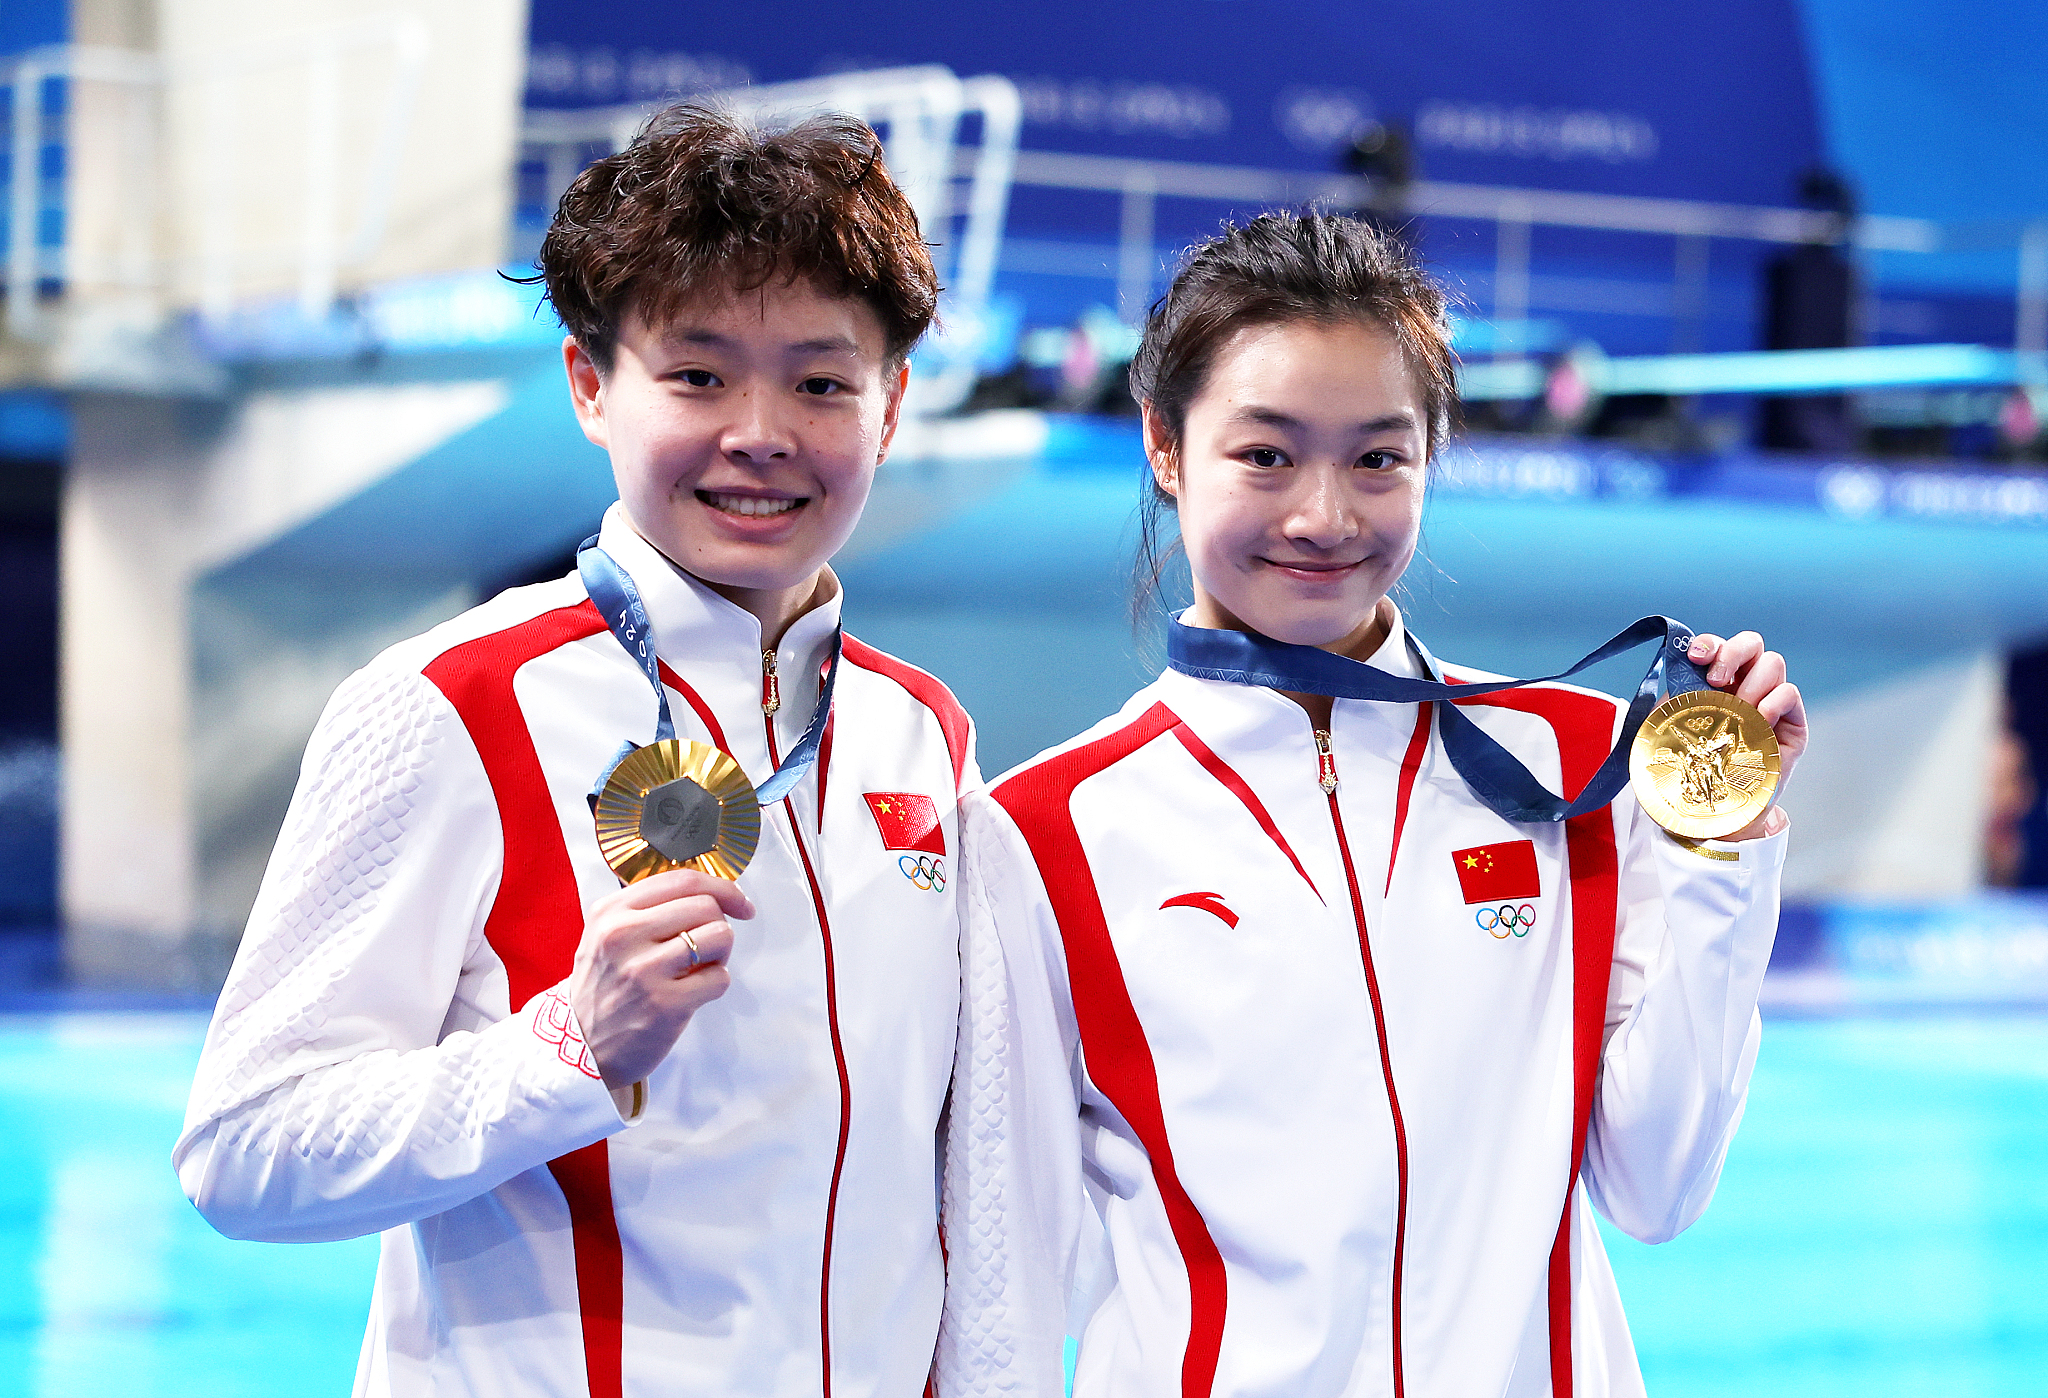 Chang Yani (R) and Chen Yiwen of China win the women's synchronized 3-meter springboard diving gold medal at the 2024 Summer Olympic Games in Paris, France, July 27, 2024. /CFP